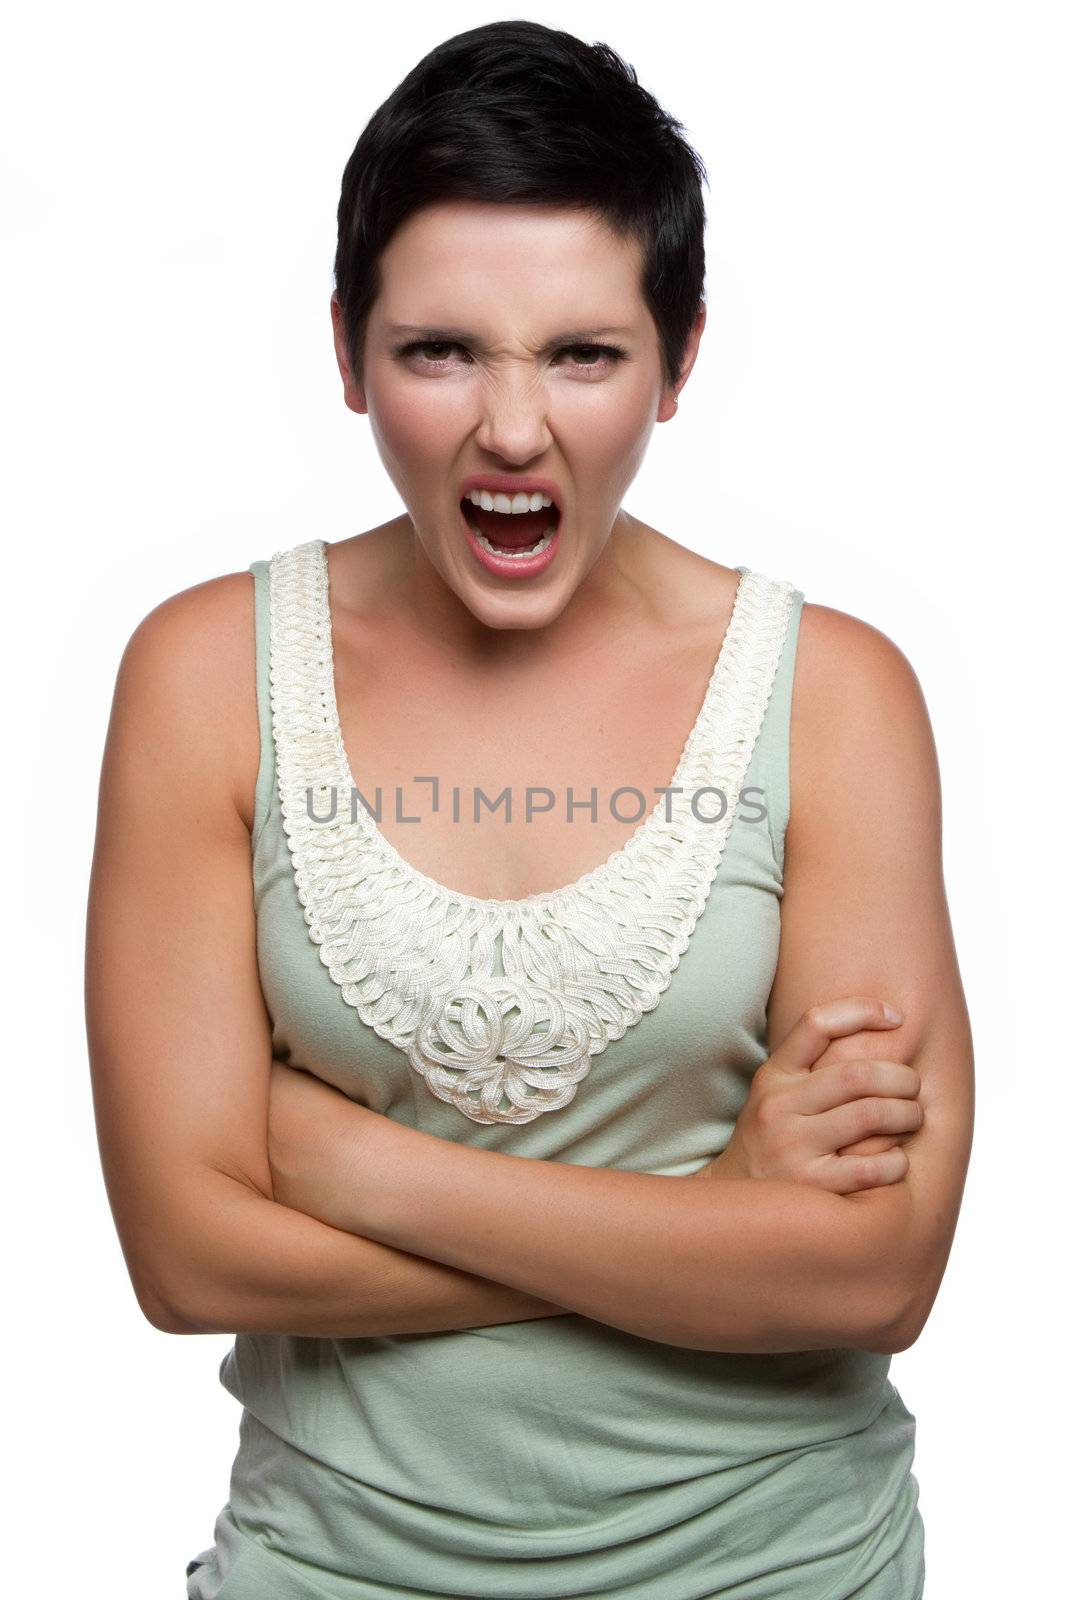 Angry Yelling Woman by keeweeboy